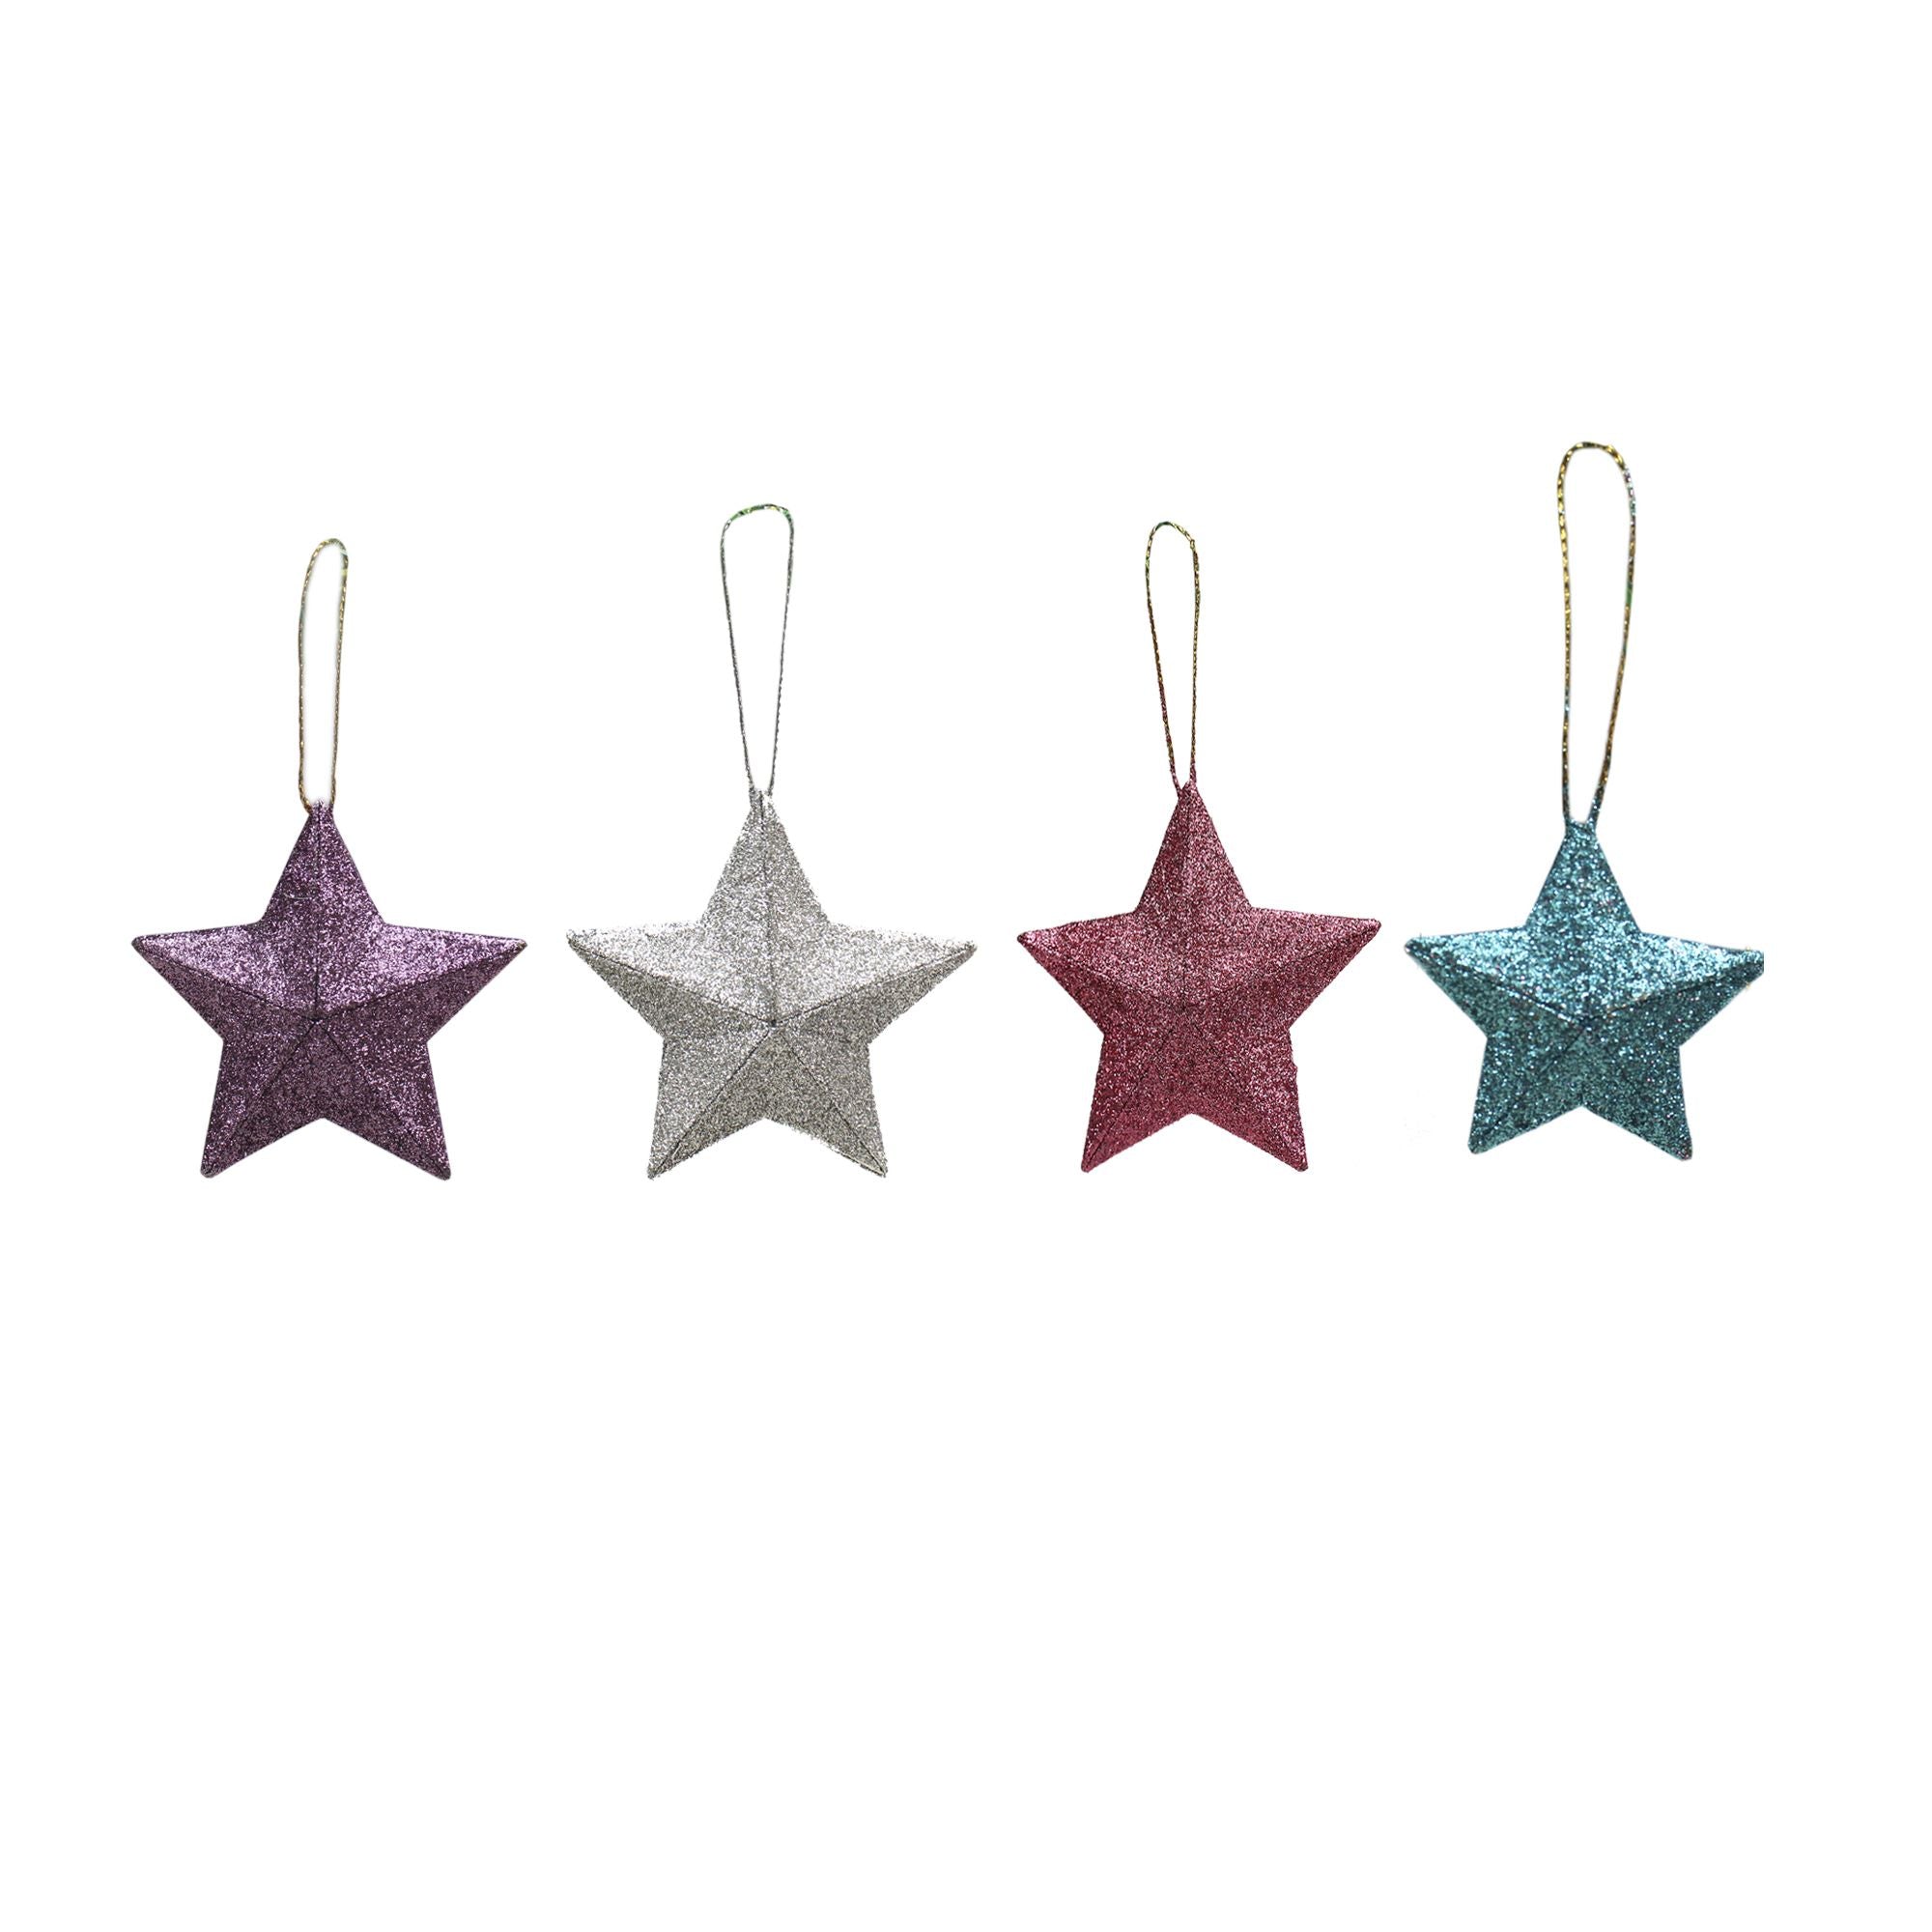 Handmade Christmas Ornaments - 3D Glitter Stars, 3.25inch, Assorted Colours - Blue, Purple, Silver, pink, 4pc